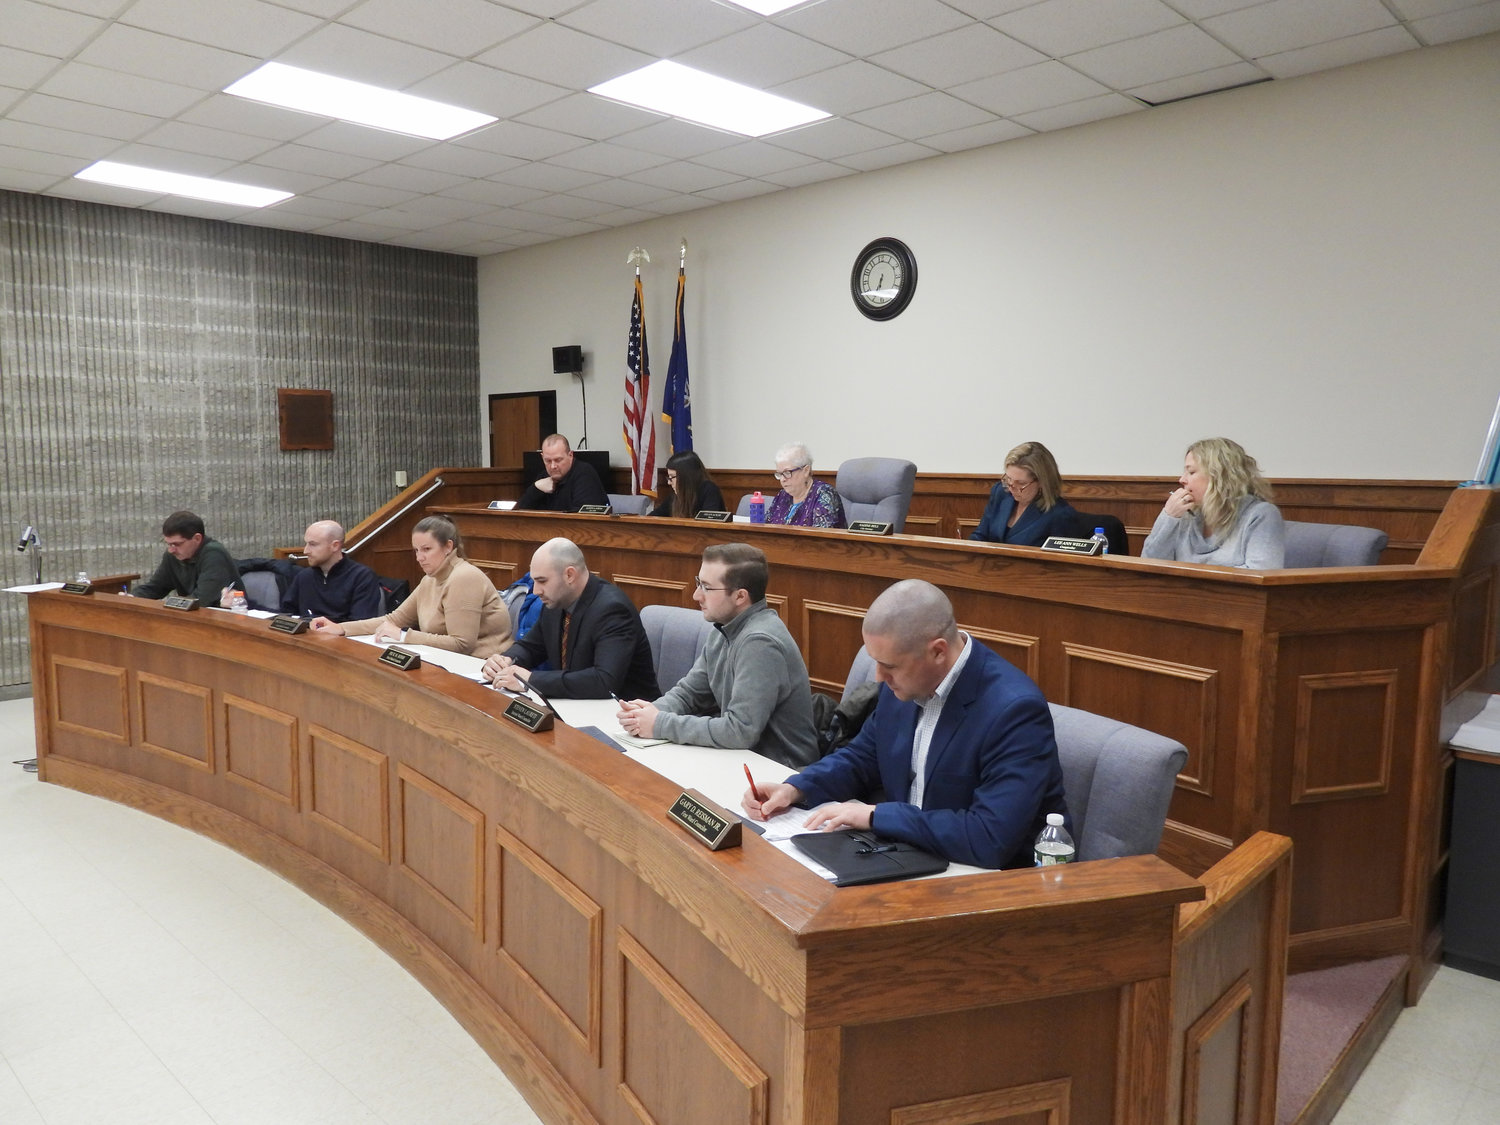 ONEIDA MEETING — The Oneida Common Council meets on Tuesday, April 19